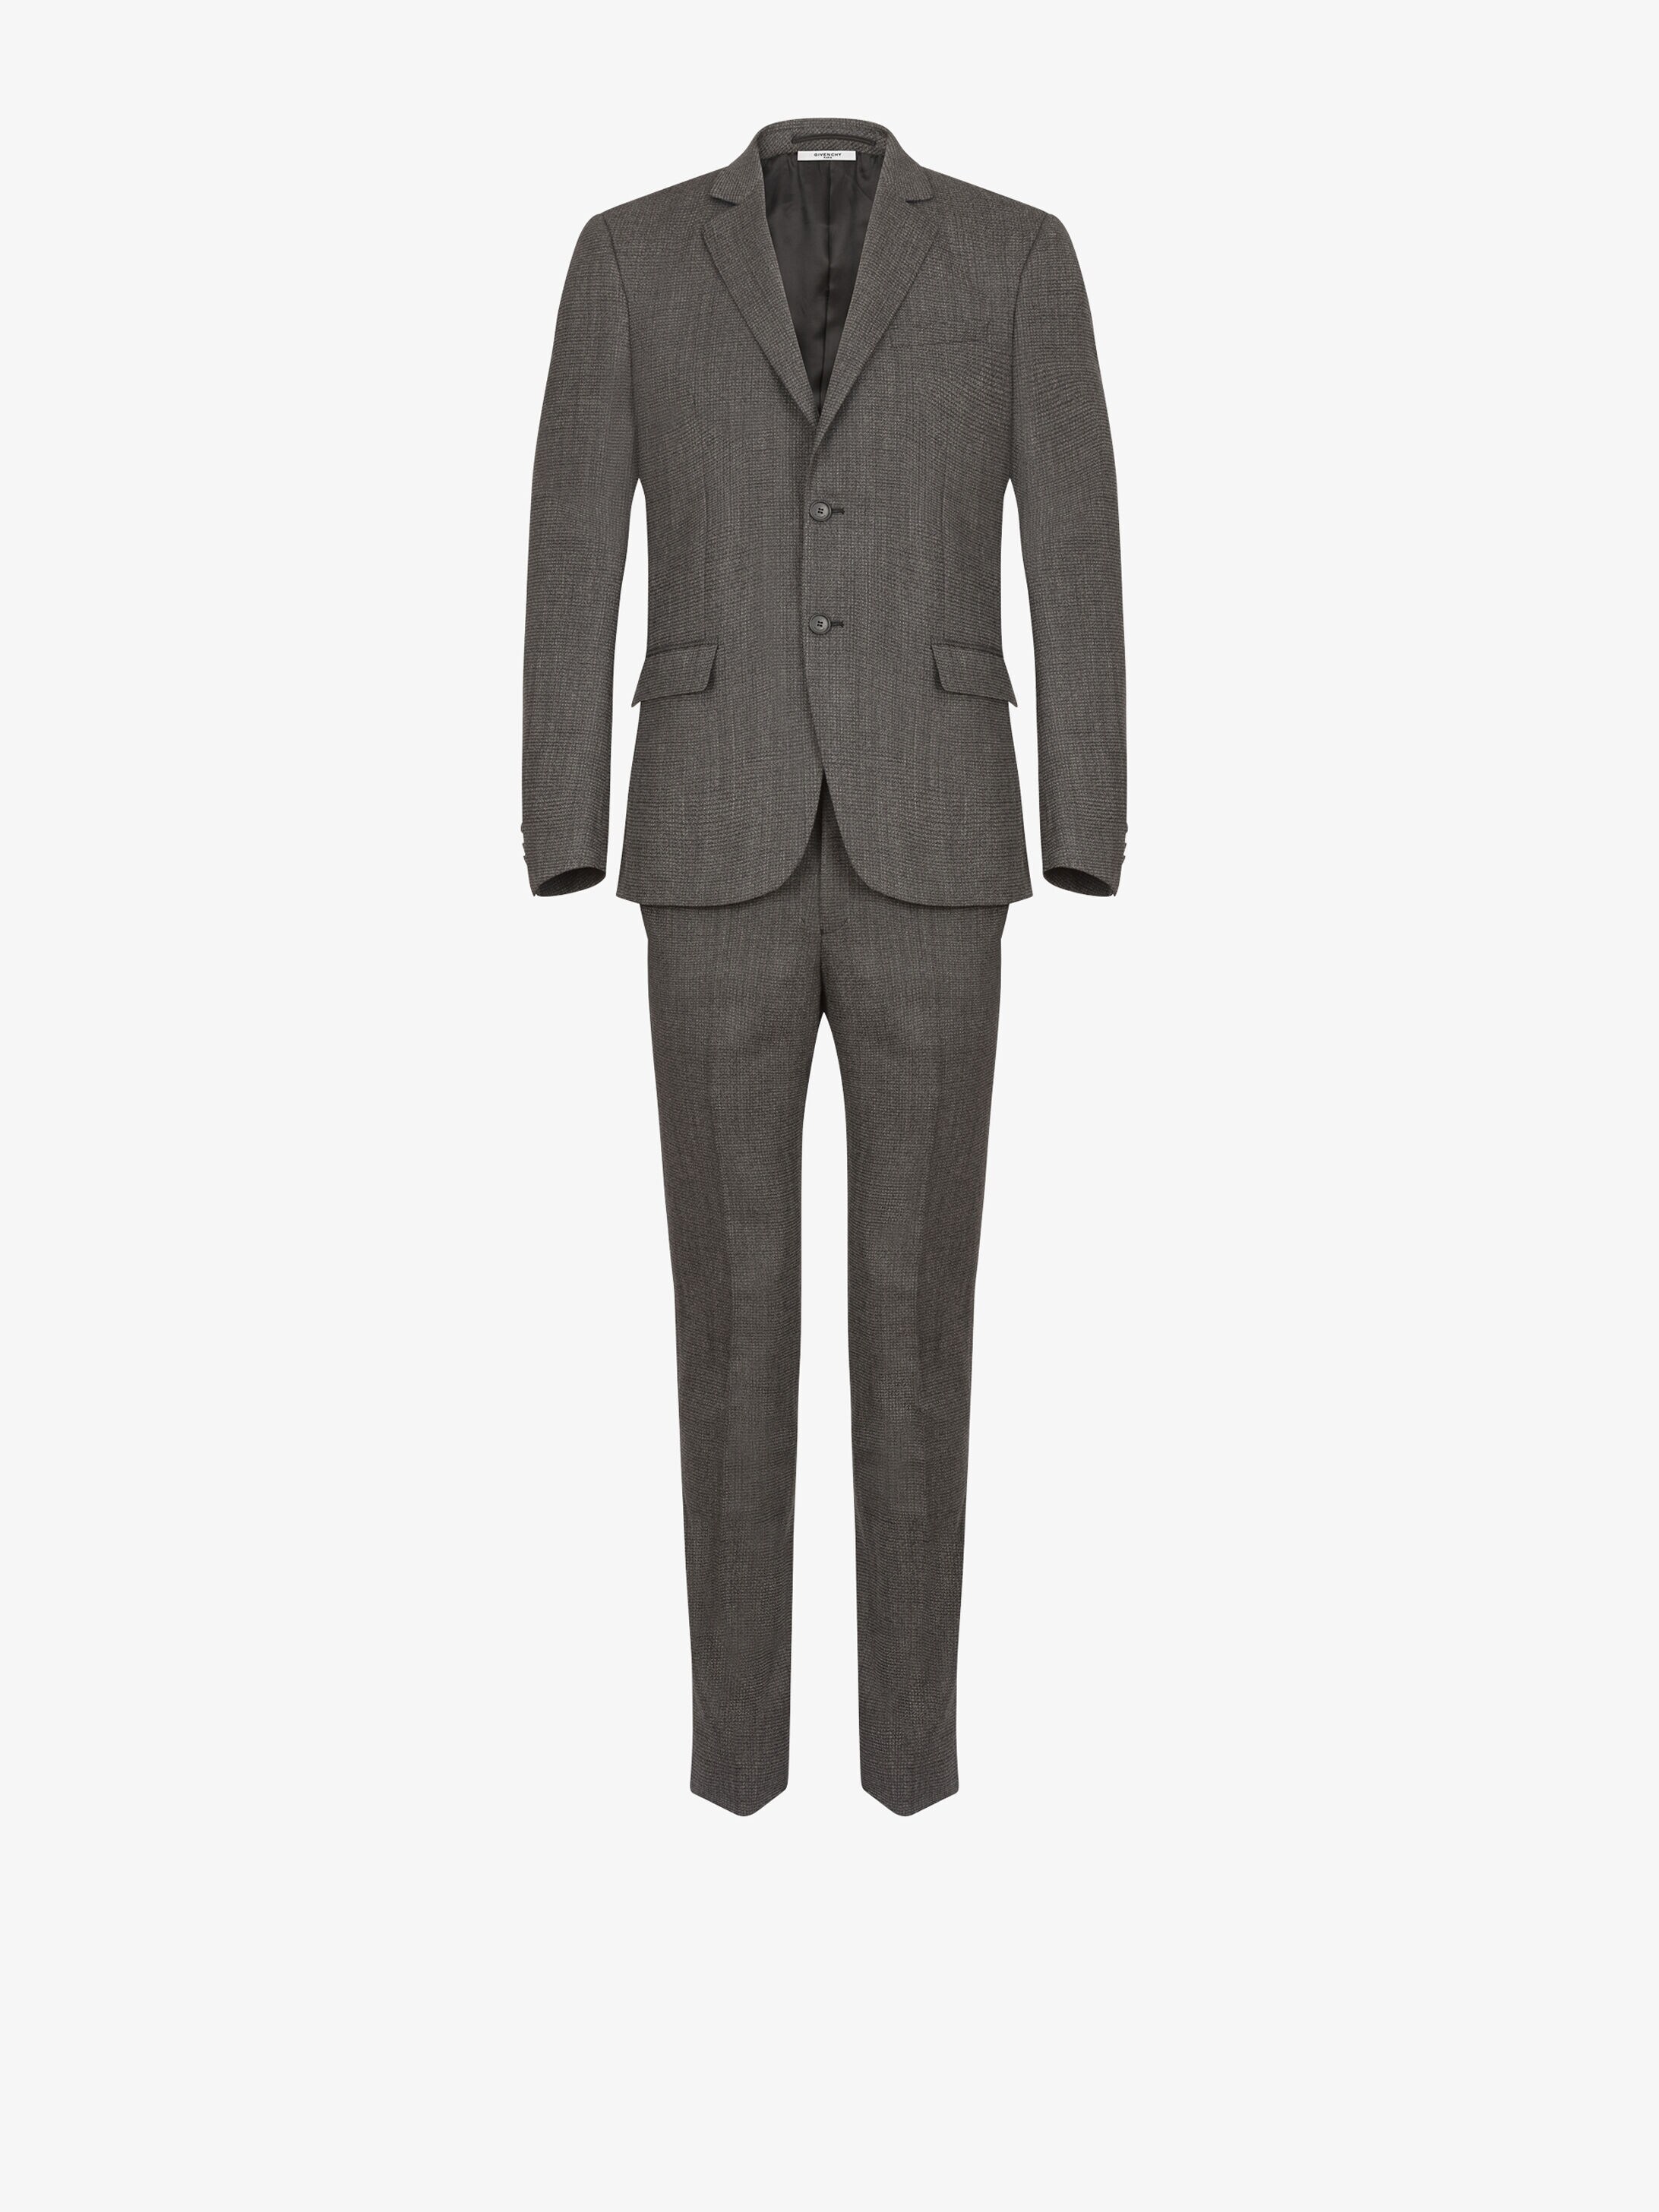 Givenchy Slim fit suit in technical 